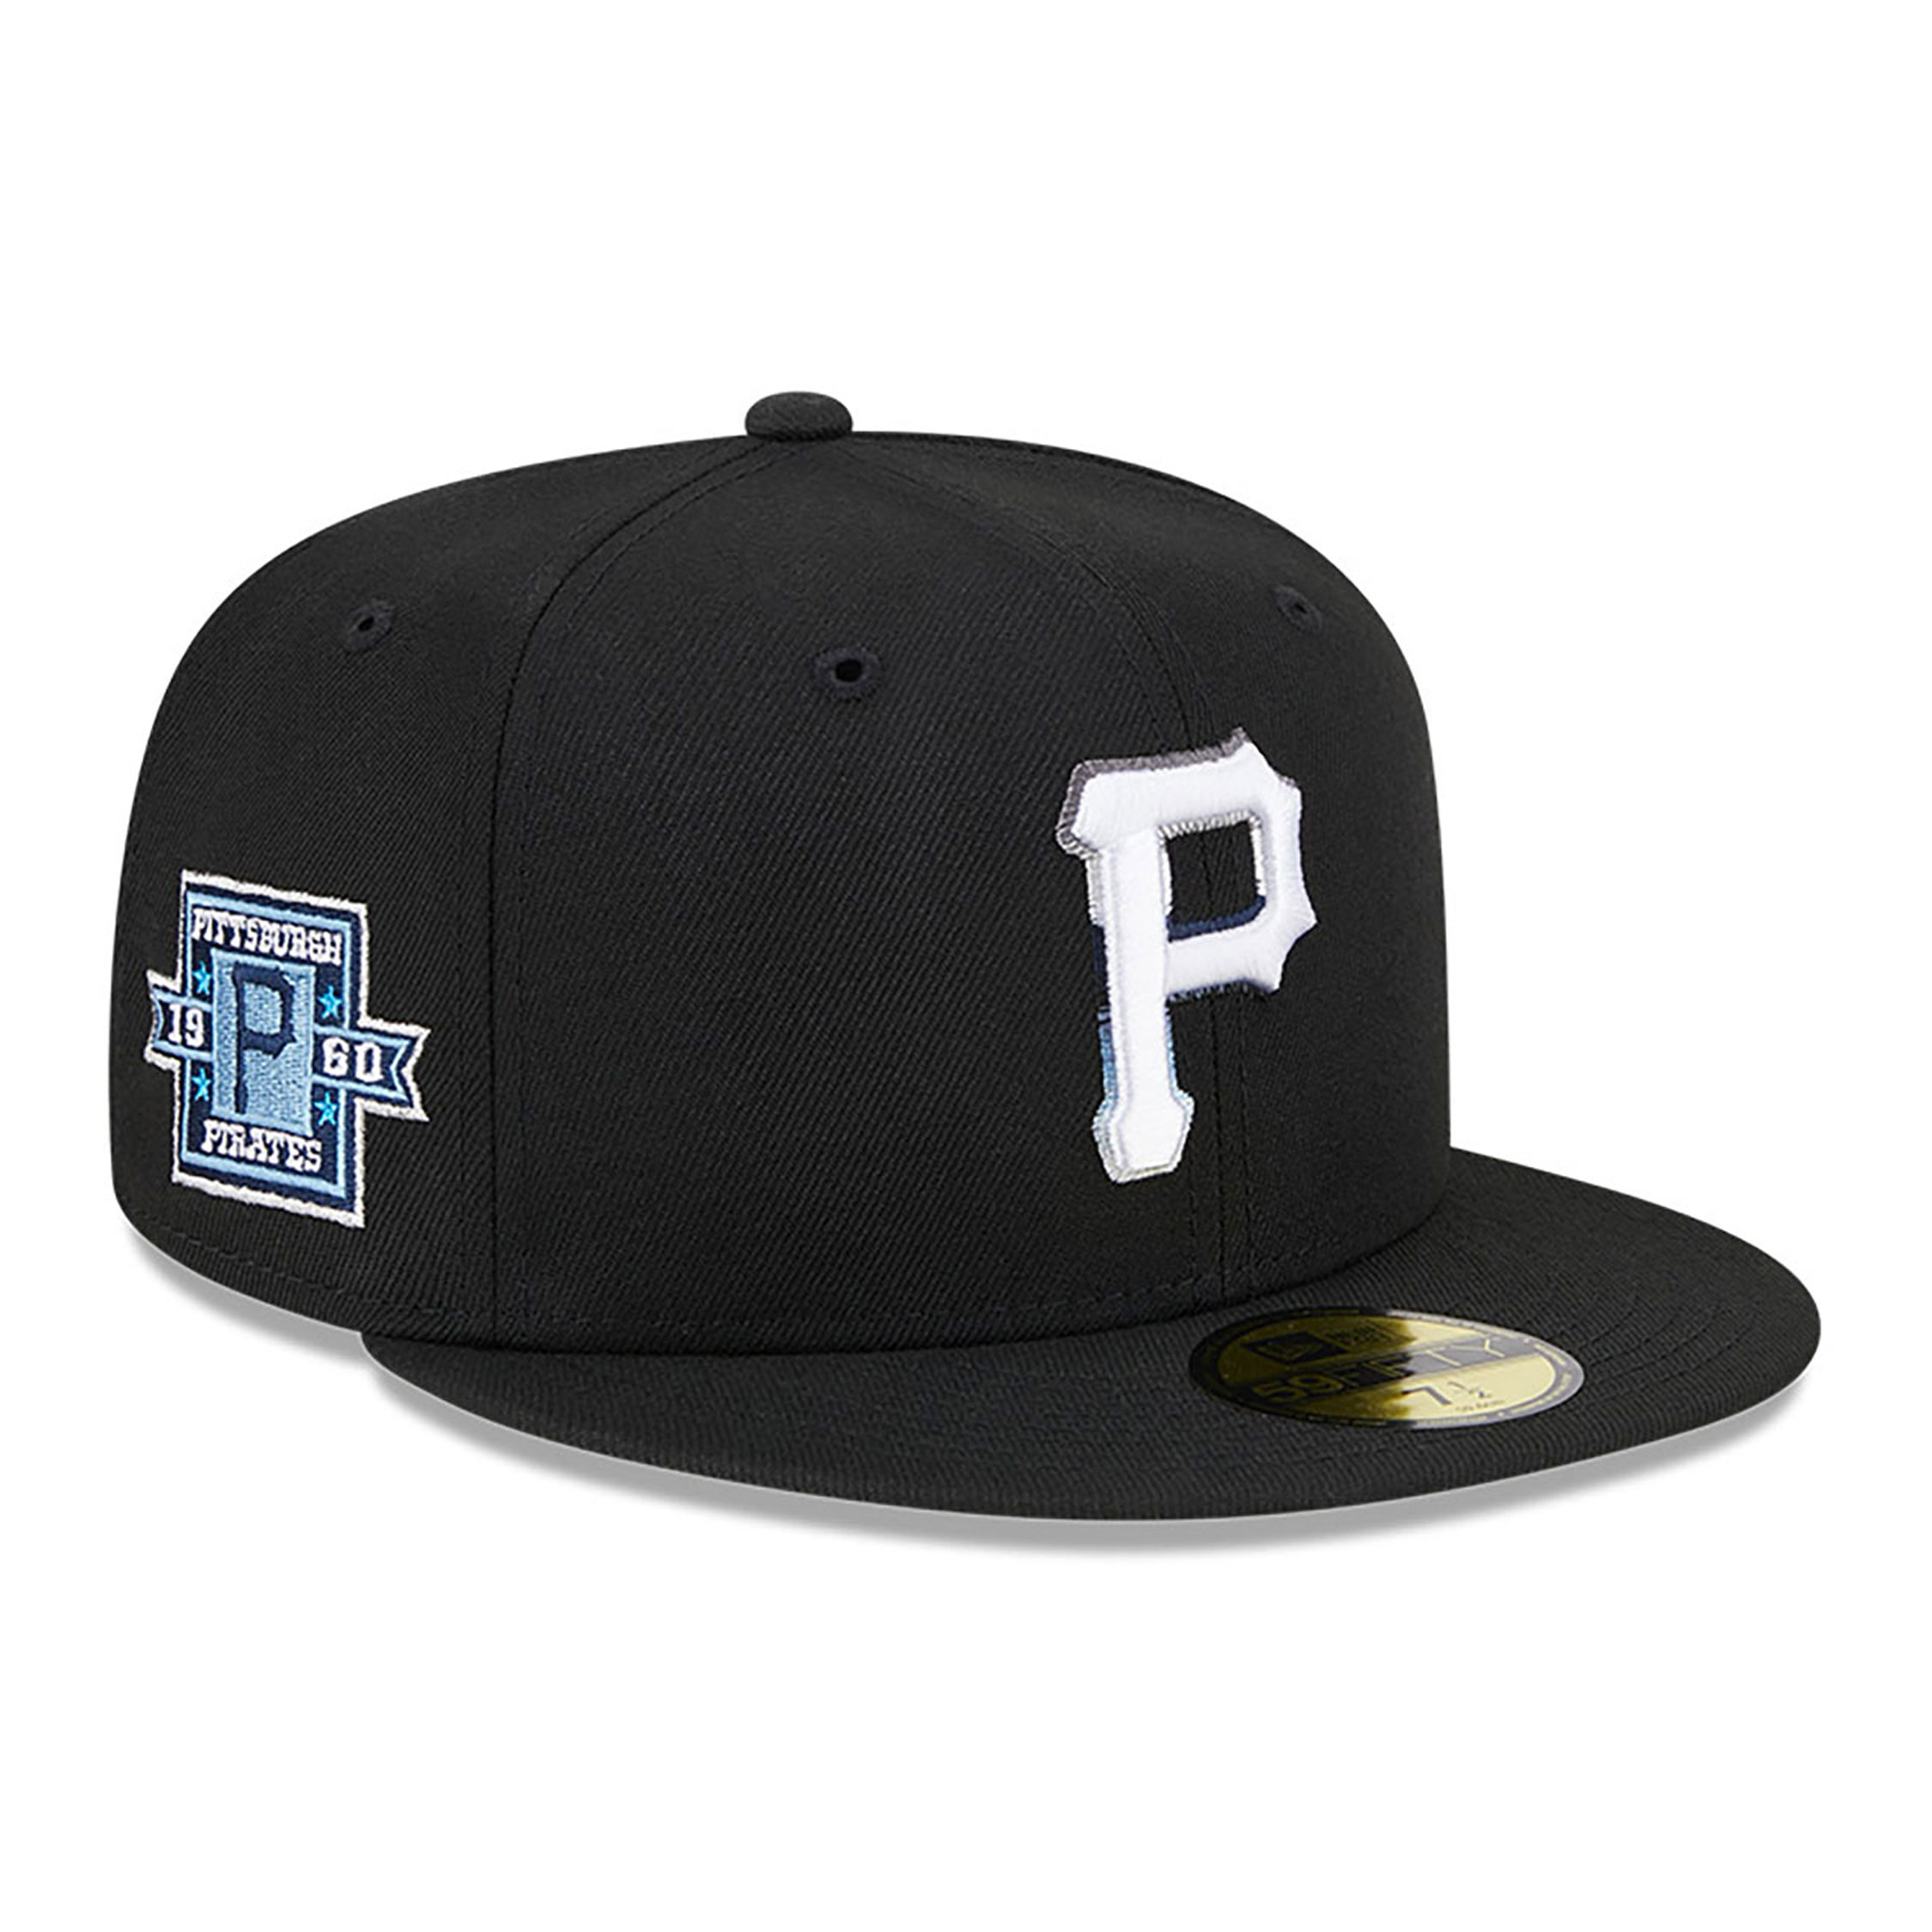 Pittsburgh Pirates Raceway Black 59FIFTY Fitted Cap